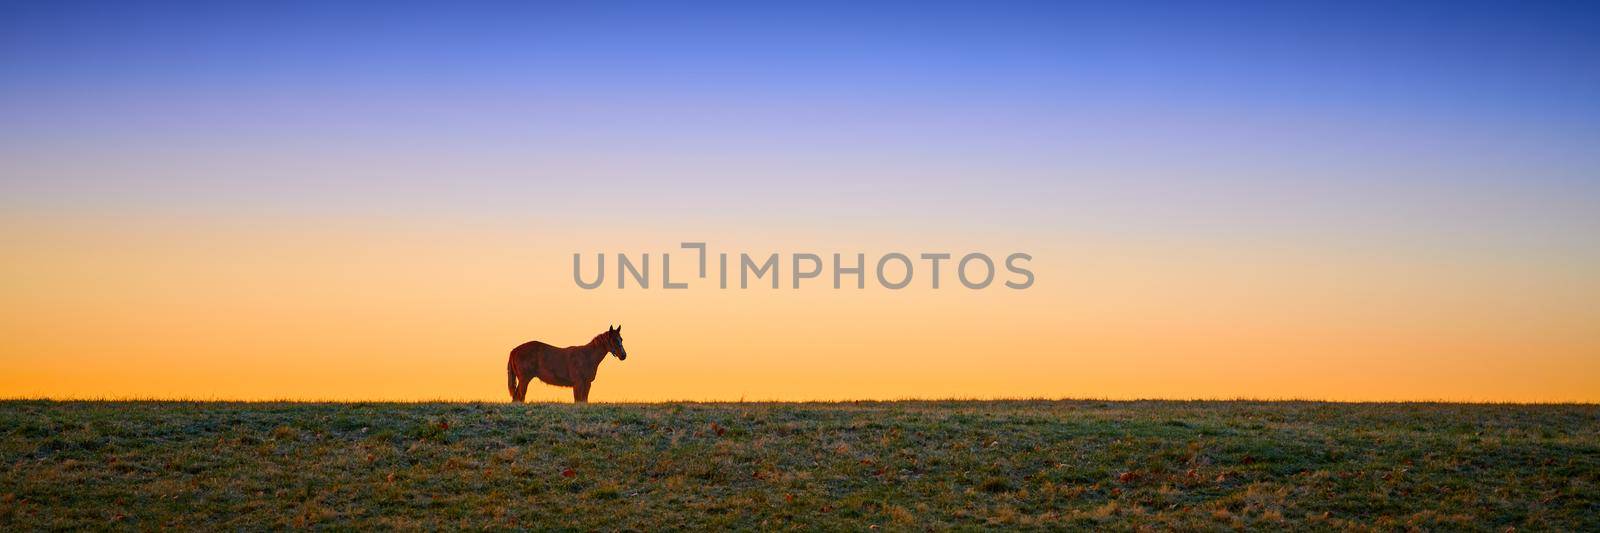 Thoroughbred horse grazing at early dawn in a field. by patrickstock